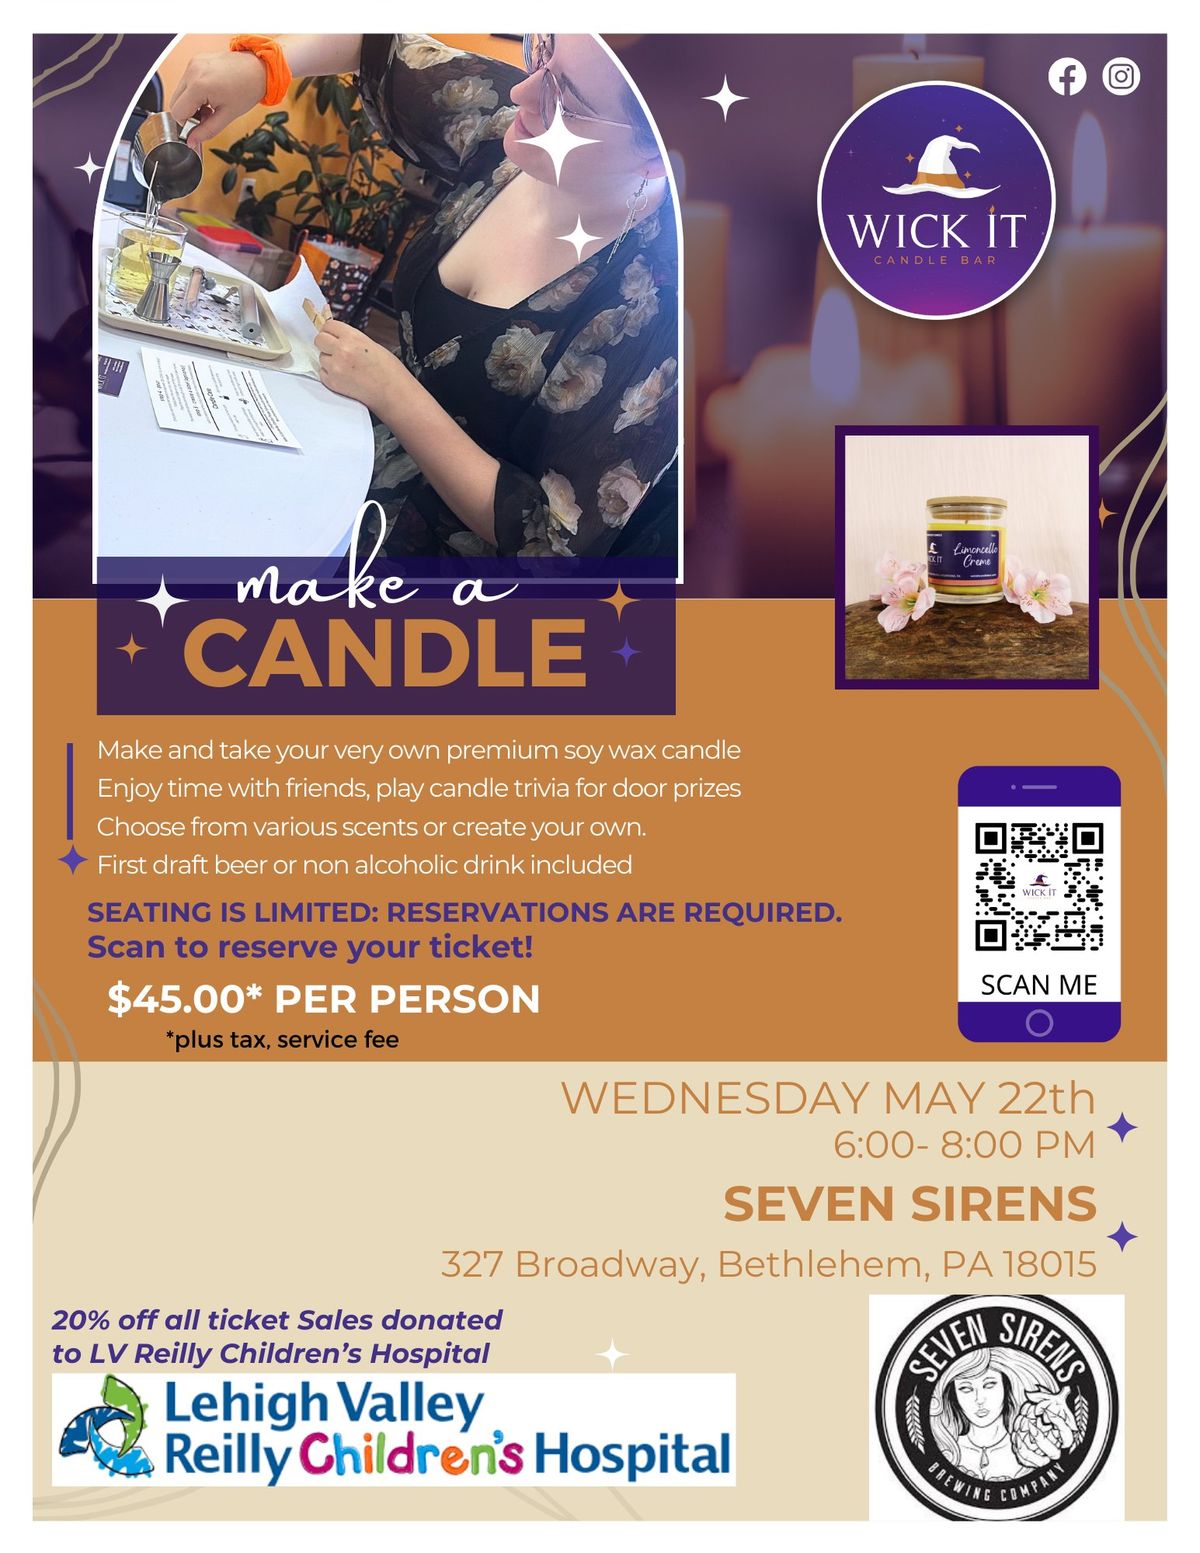 Seven Sirens l Wick It Candle Bar - Candlemaking Workshop